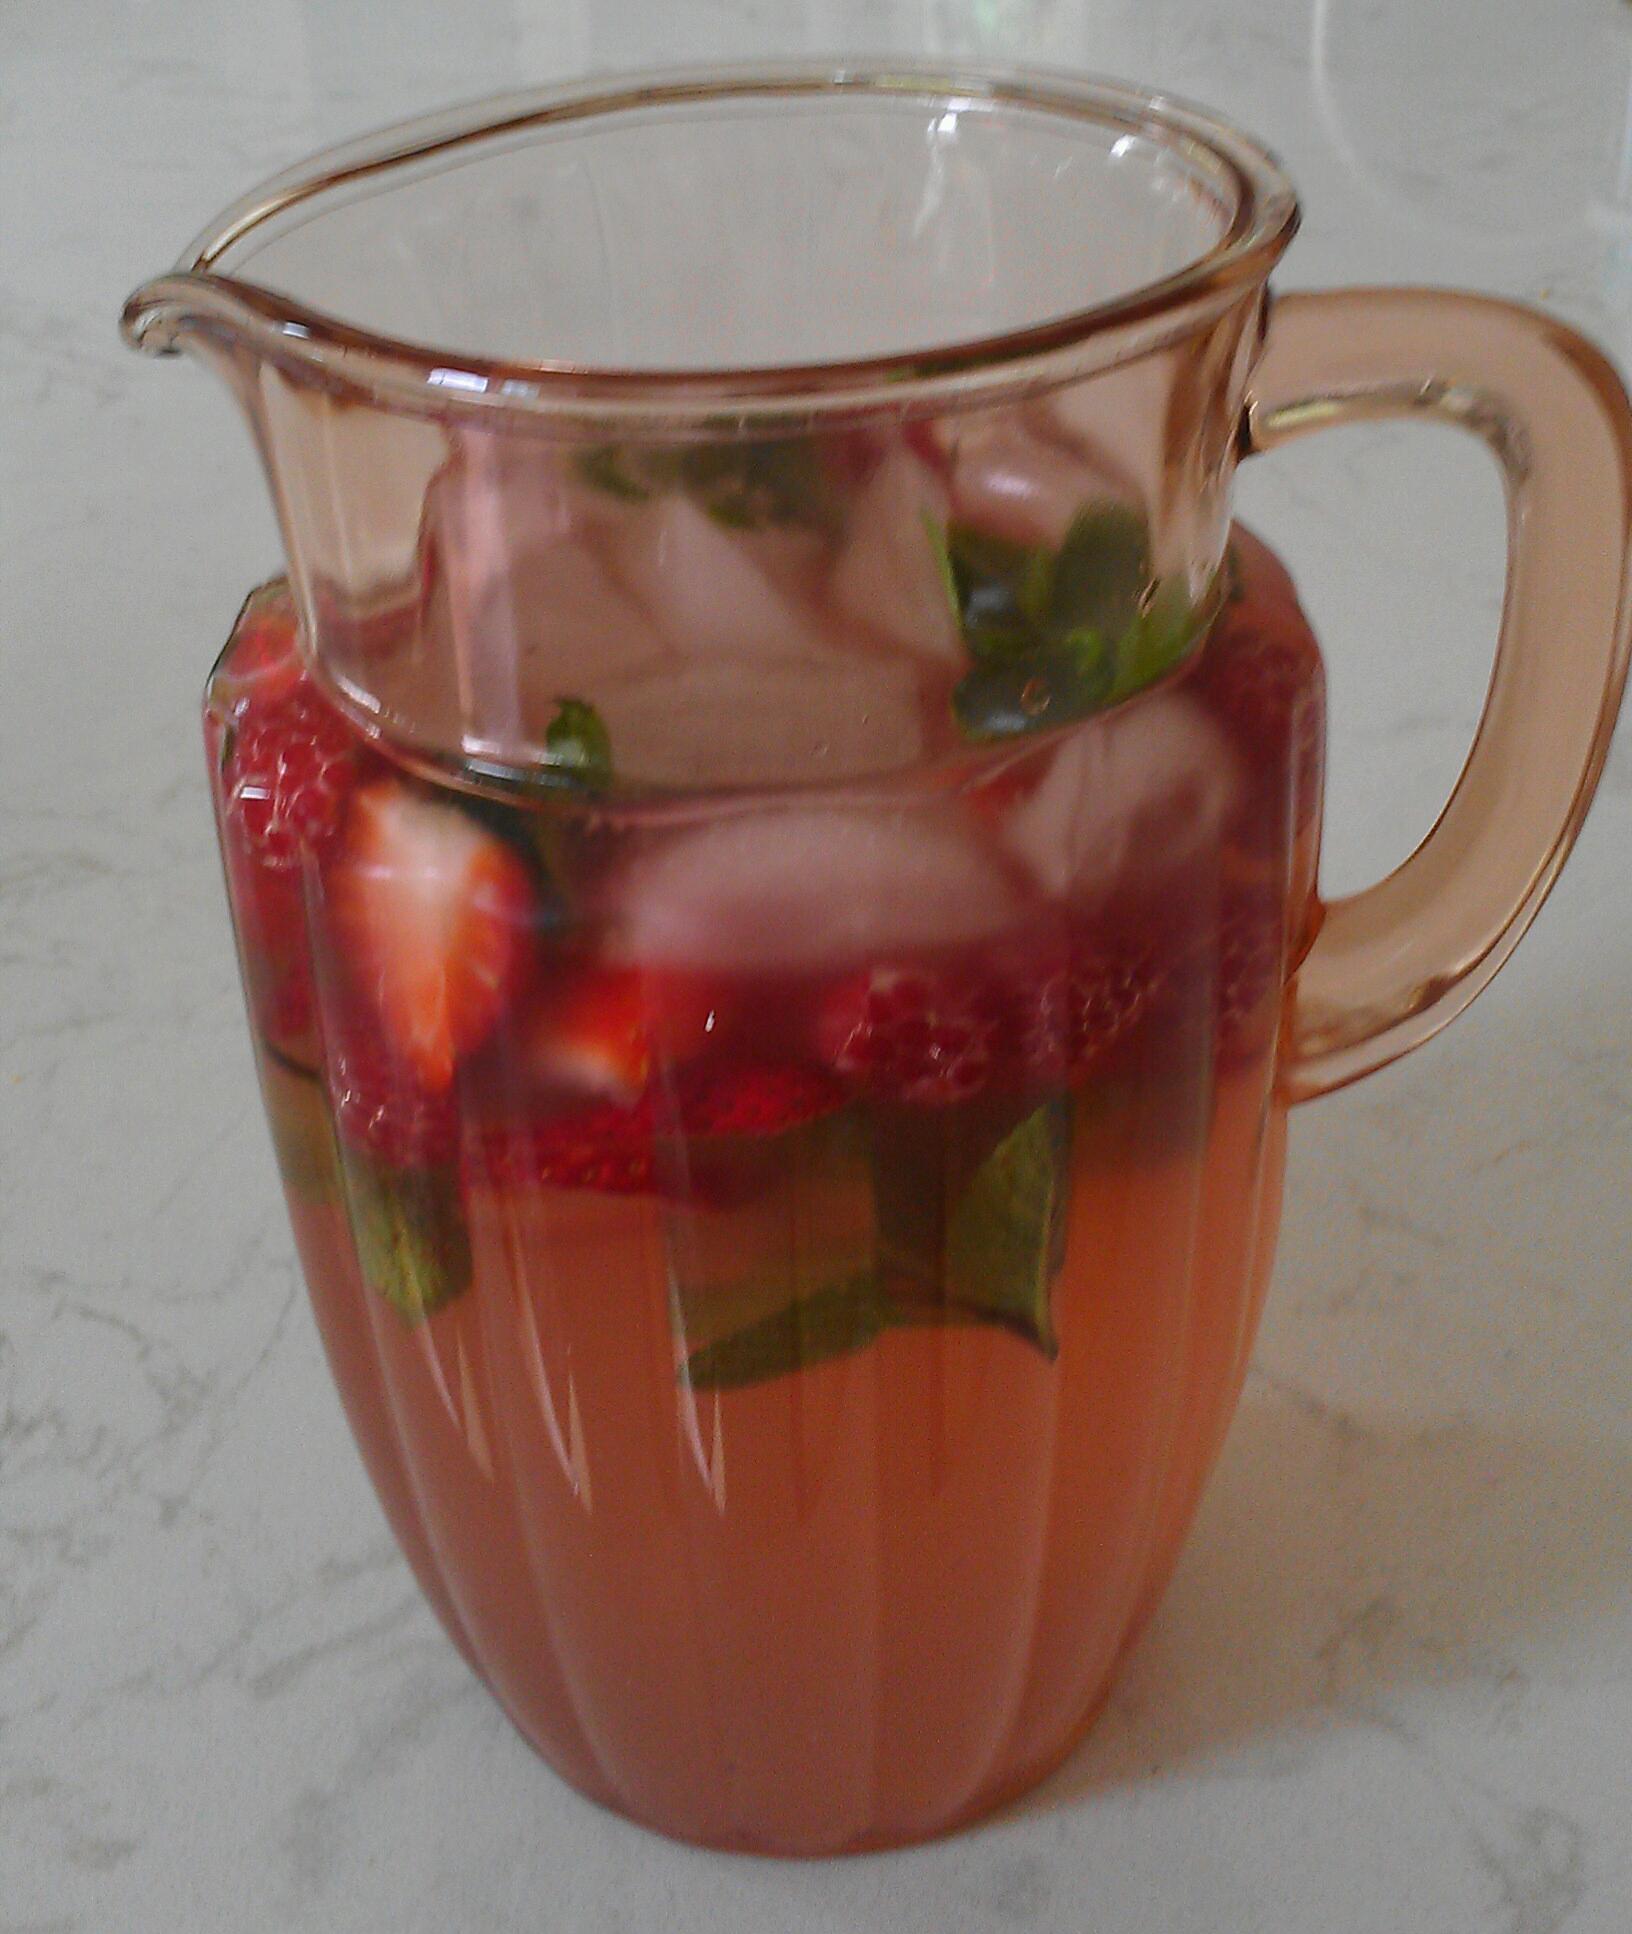 Pomegranate-Berry Spa Water